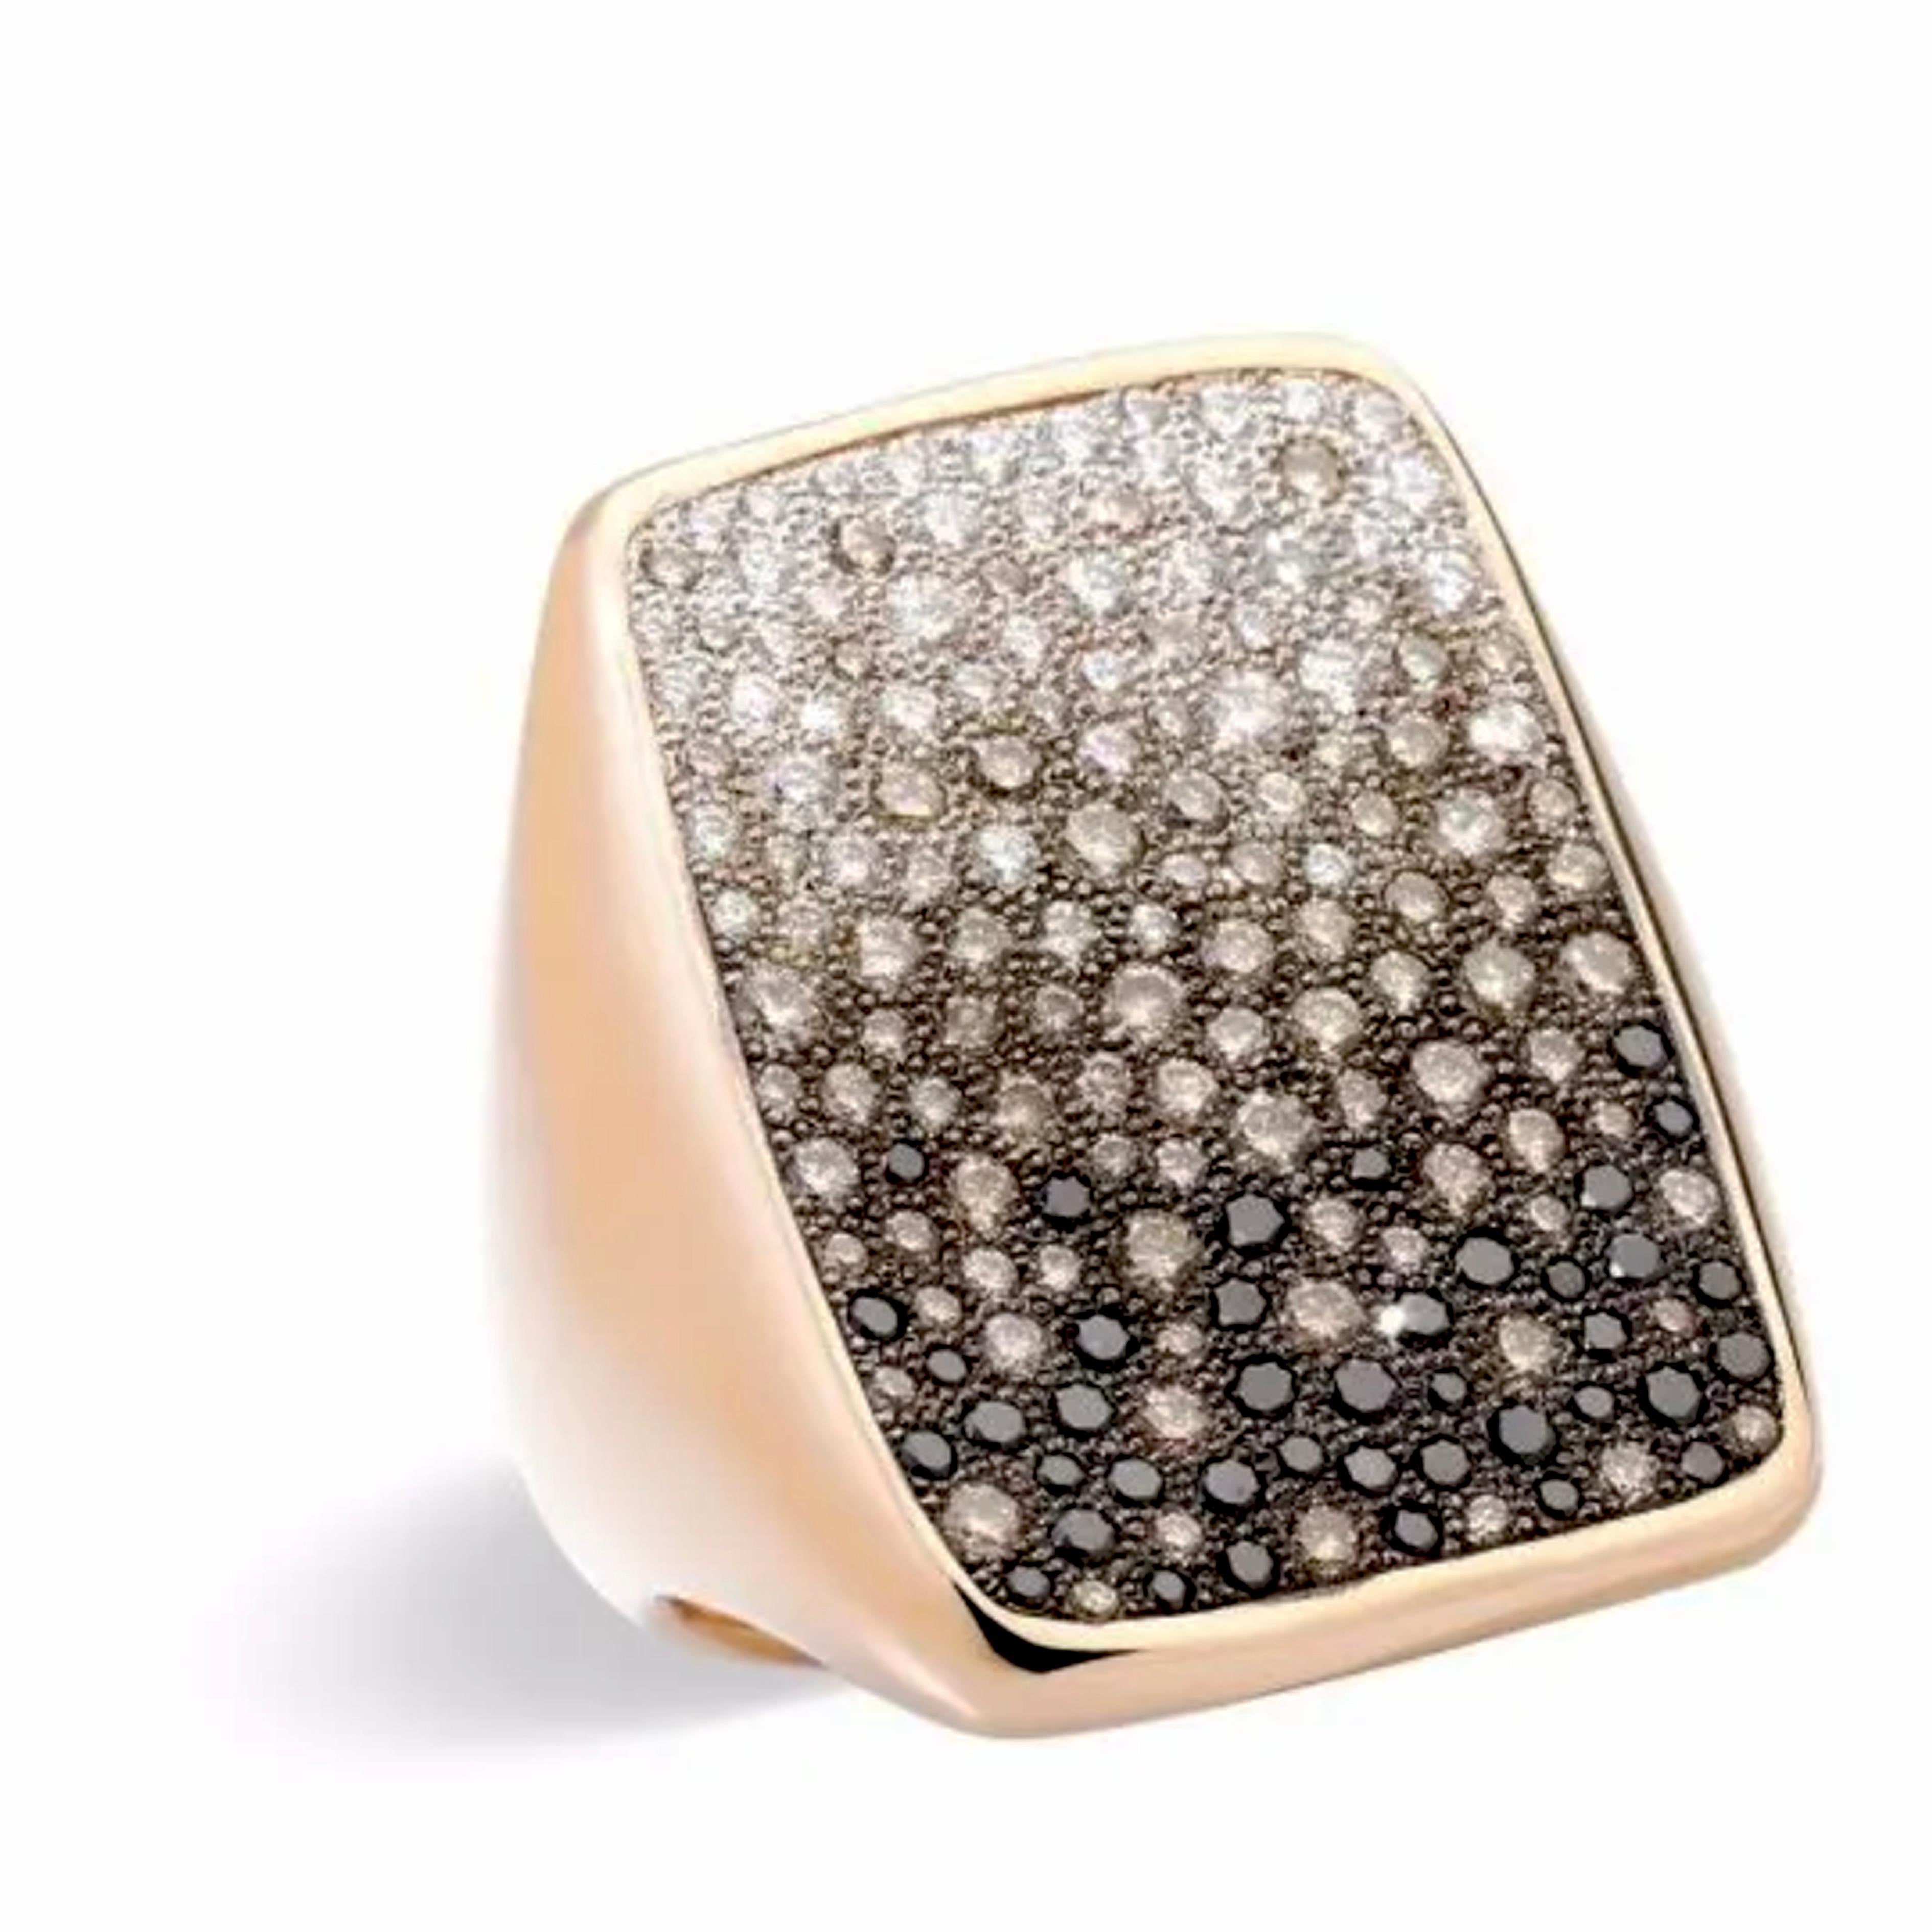 Part of Pomellato Sabbia, Sand Collection with white, black and brown diamonds that resemble small grains of sand on a metal surface, this awesome, great impact, large size ring is, like all Pomellato Jewels, a timeless contemporary classic.
For a